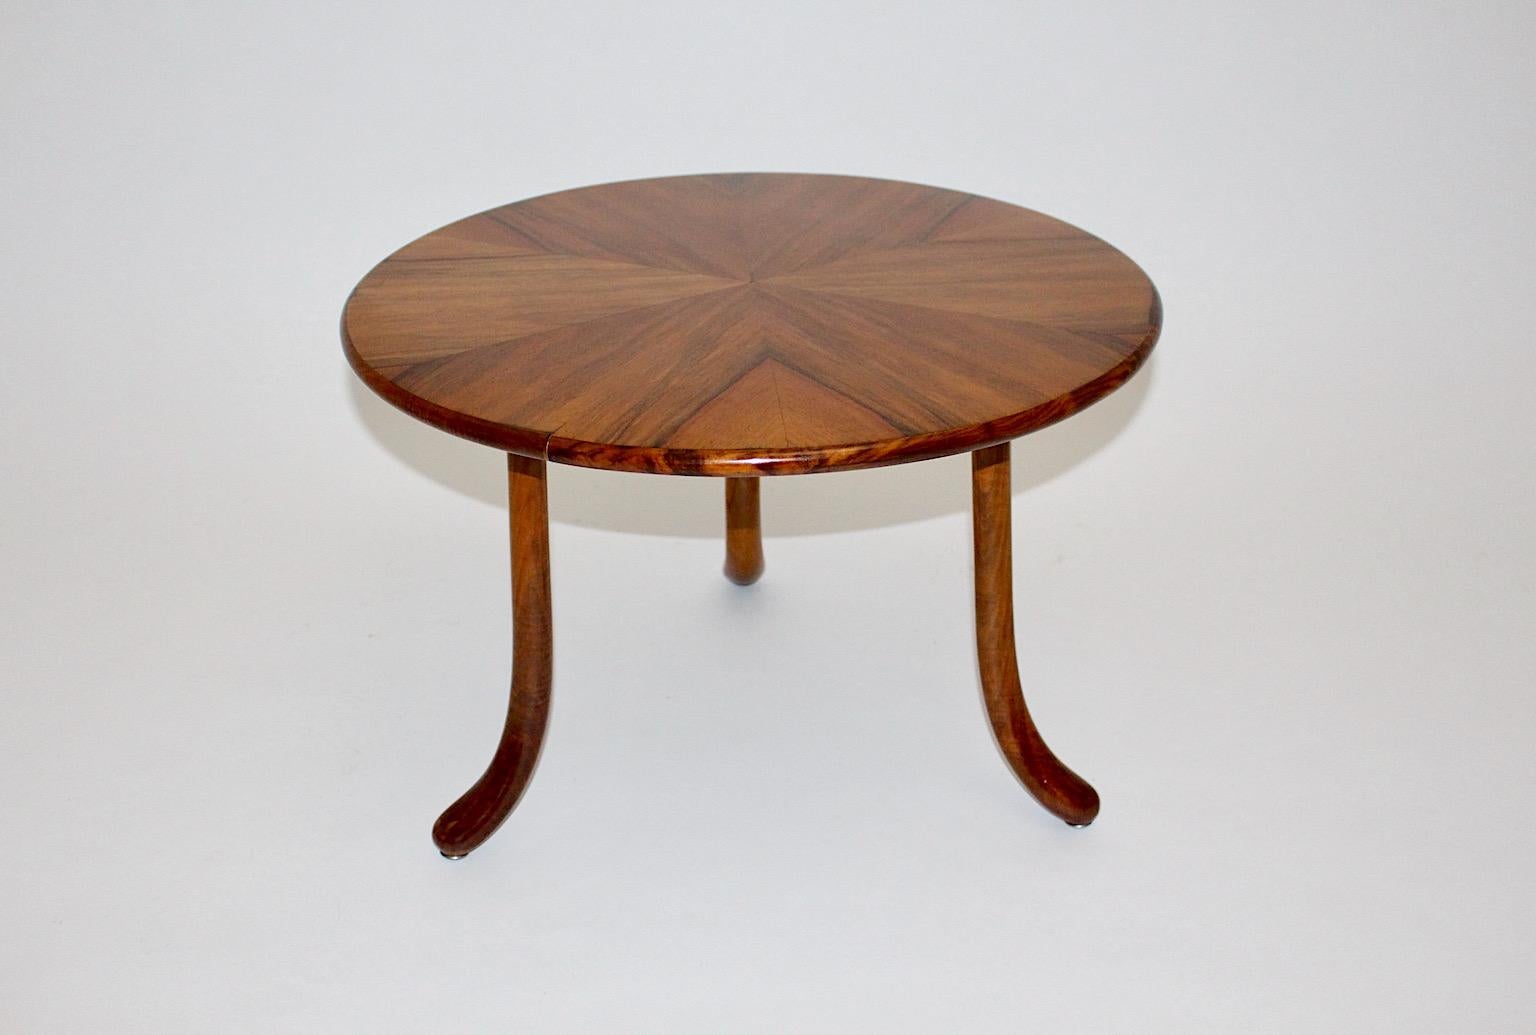 Art Deco vintage authentic sofa table or side table in circular form from walnut and beech by Josef Frank for Haus & Garten circa 1925 Vienna.
While the plate shows a wonderful stellar walnut veneer with a lively play from wood, all three feet made